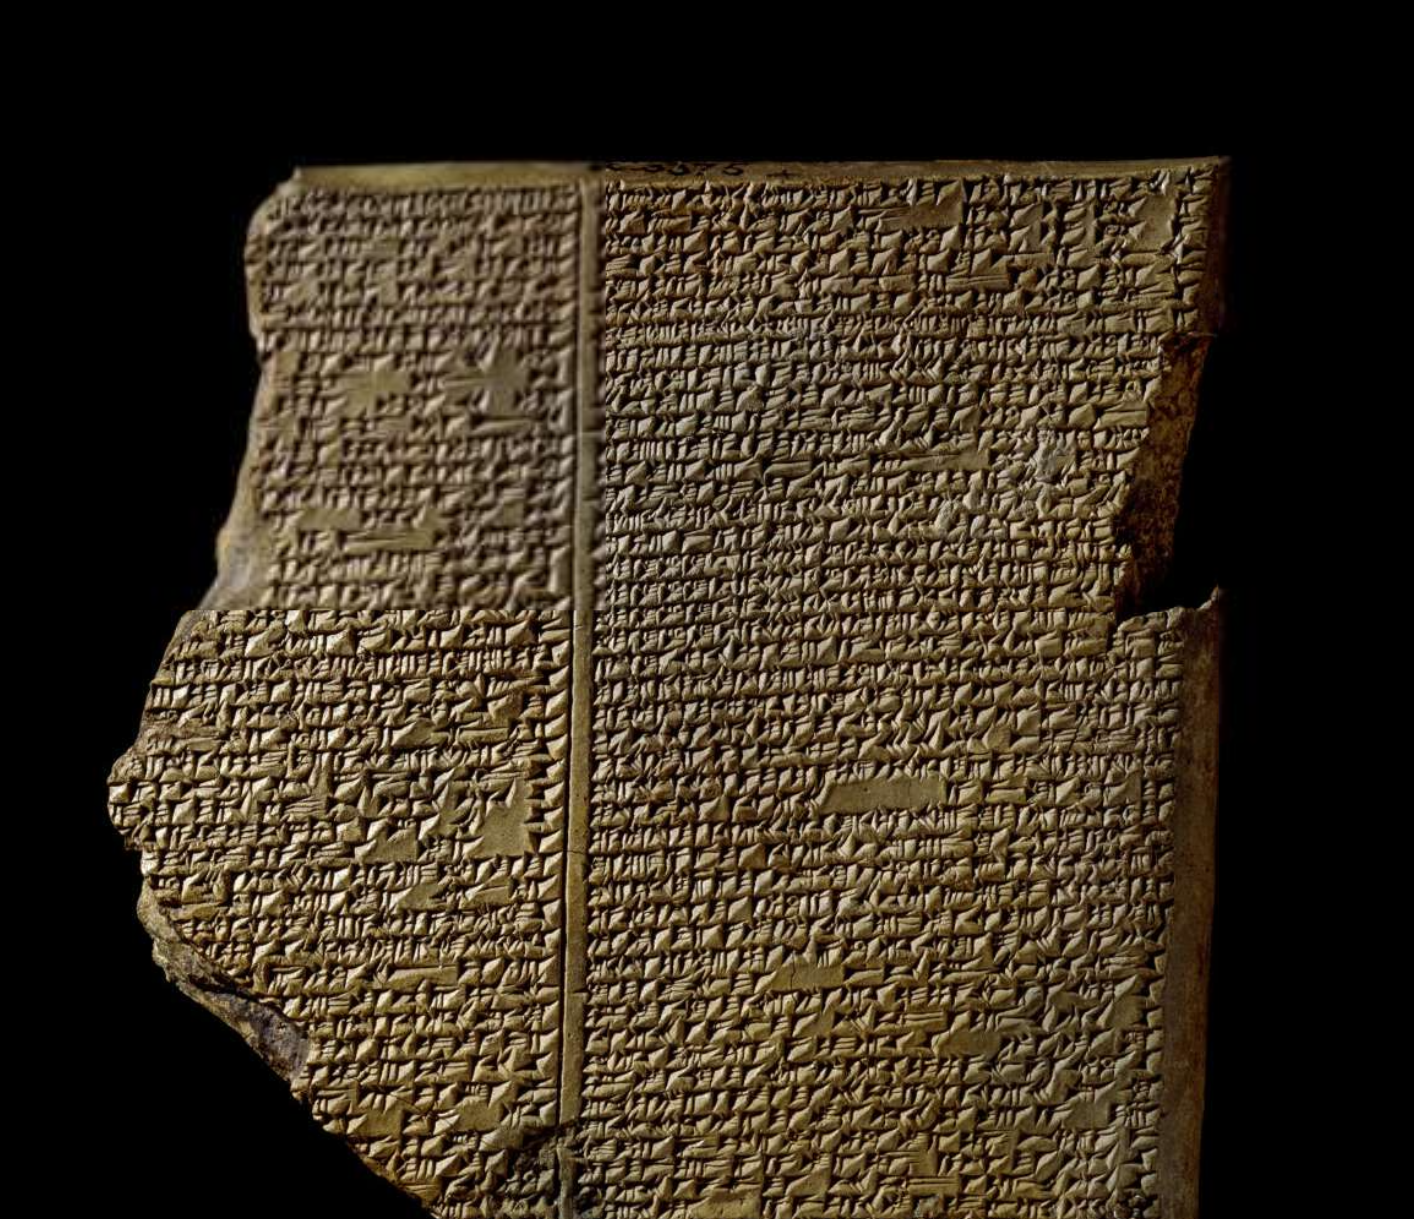 Flood tablet from Gilgamesh, credit to The British Museum